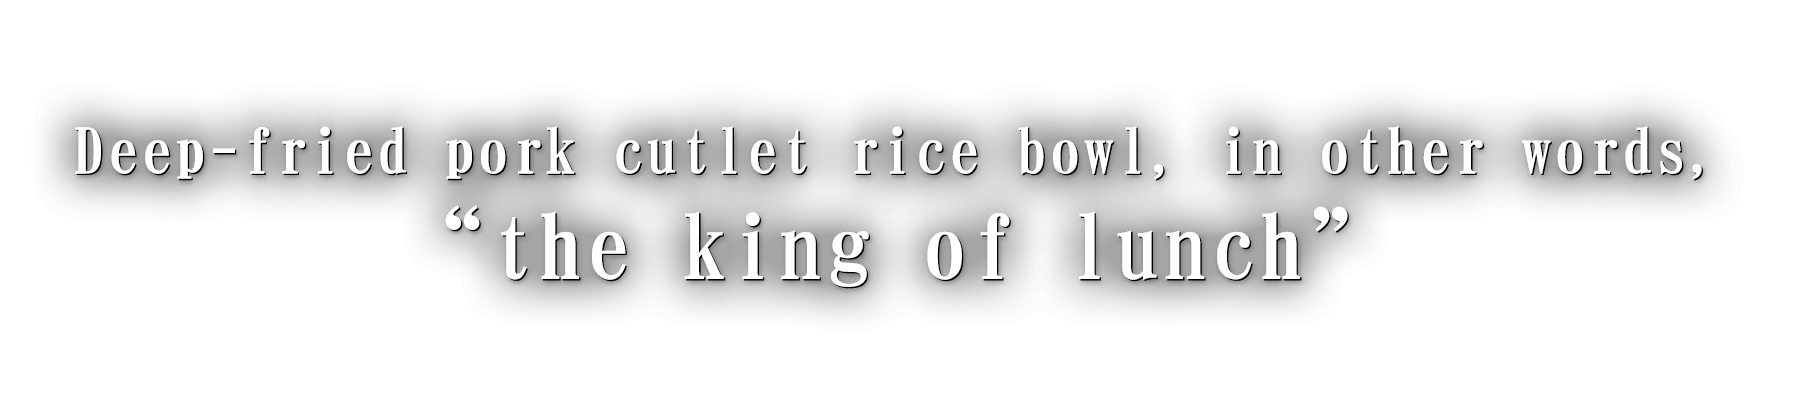 Deep-fried pork cutlet rice bowl, in other words, “the king of lunch”